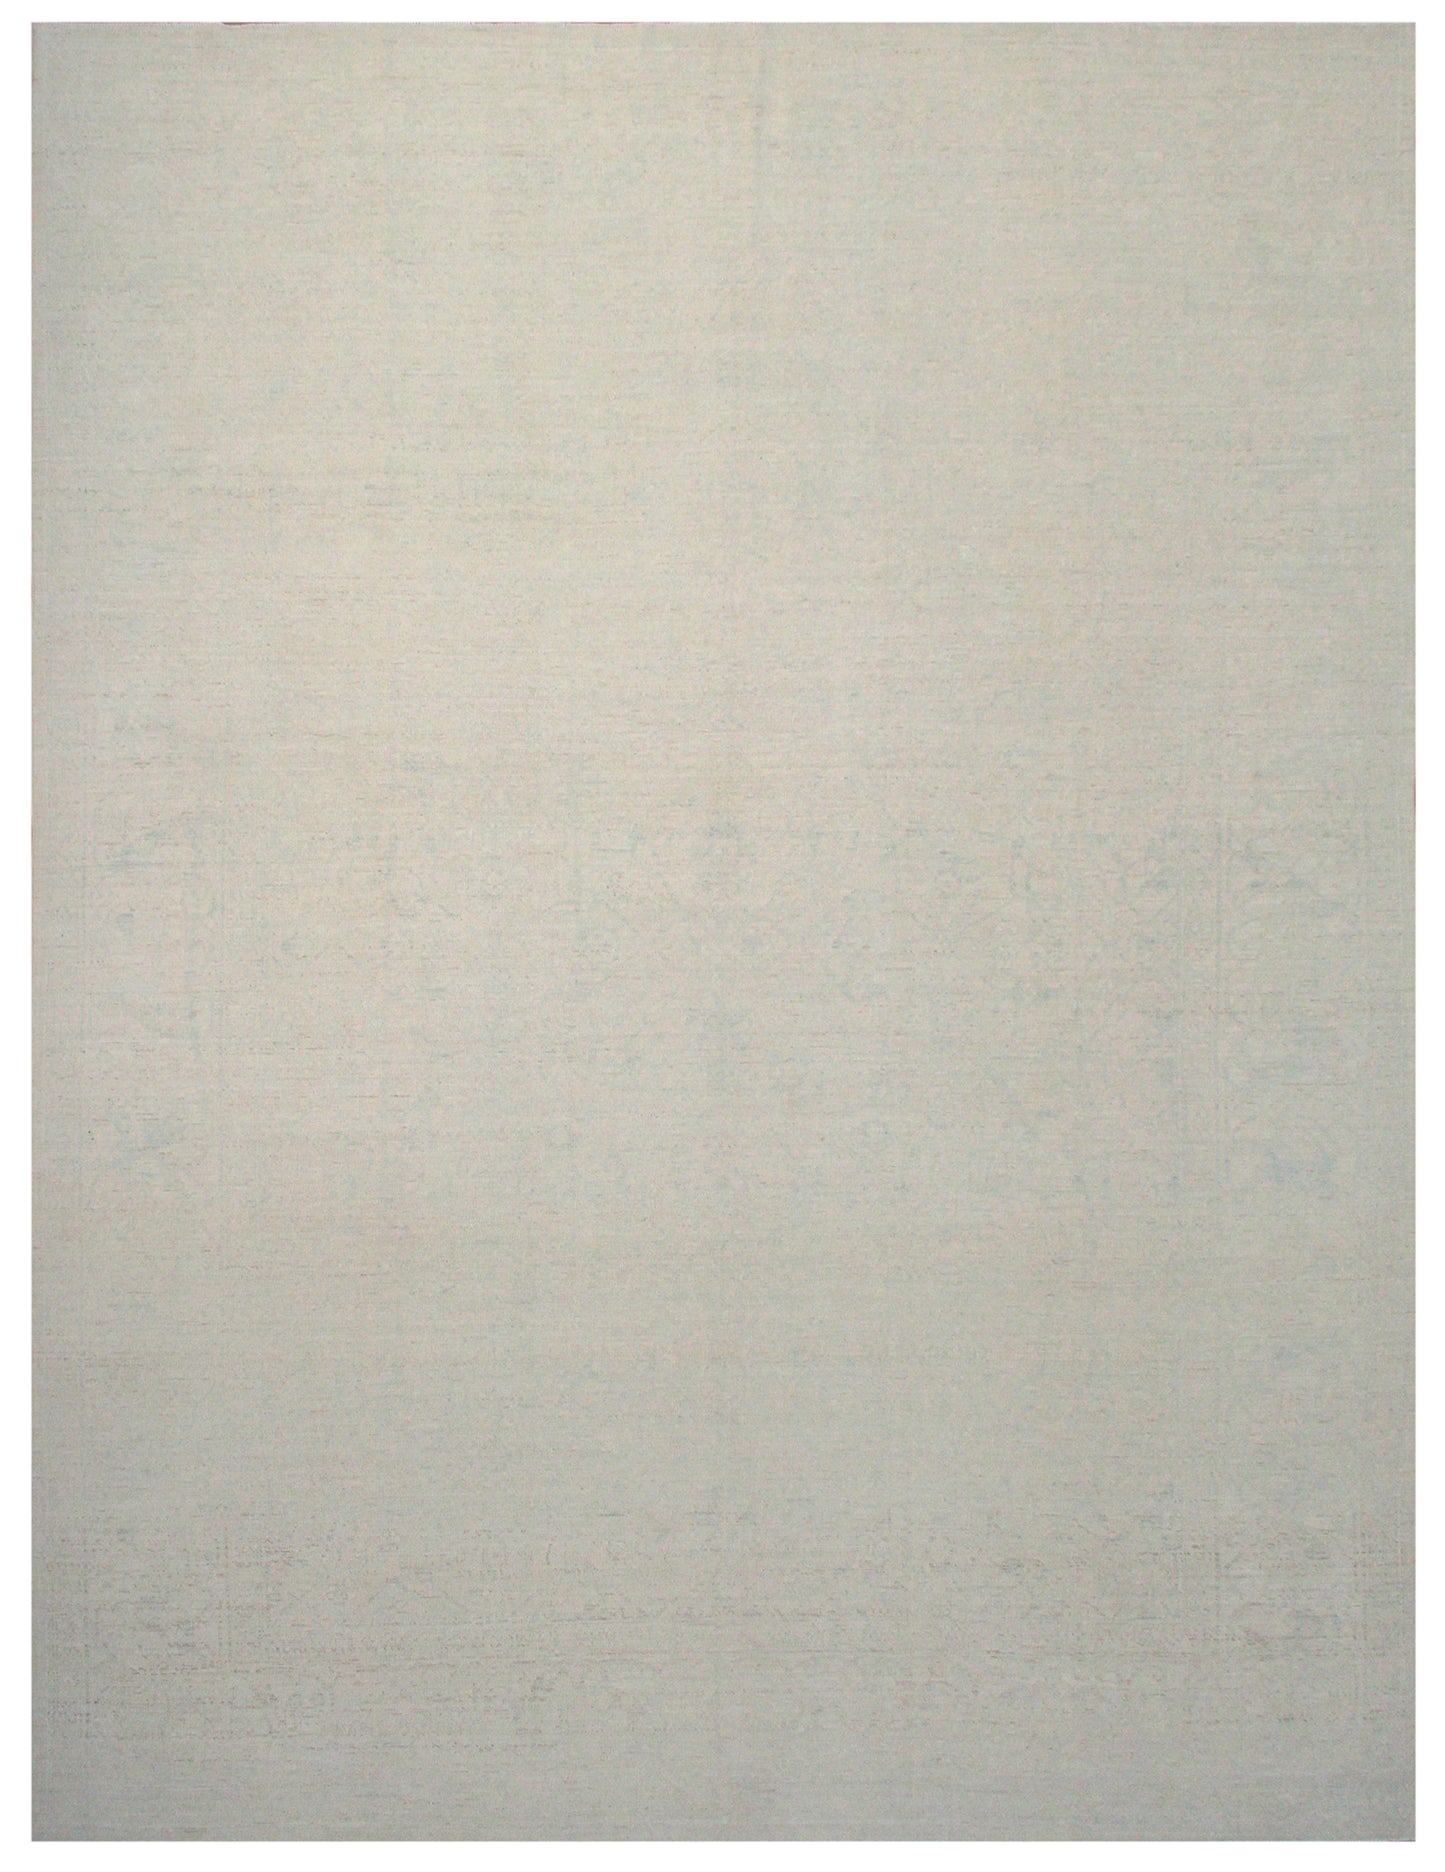 12'x9' Ariana Washed out pale Ivory Blue Rug